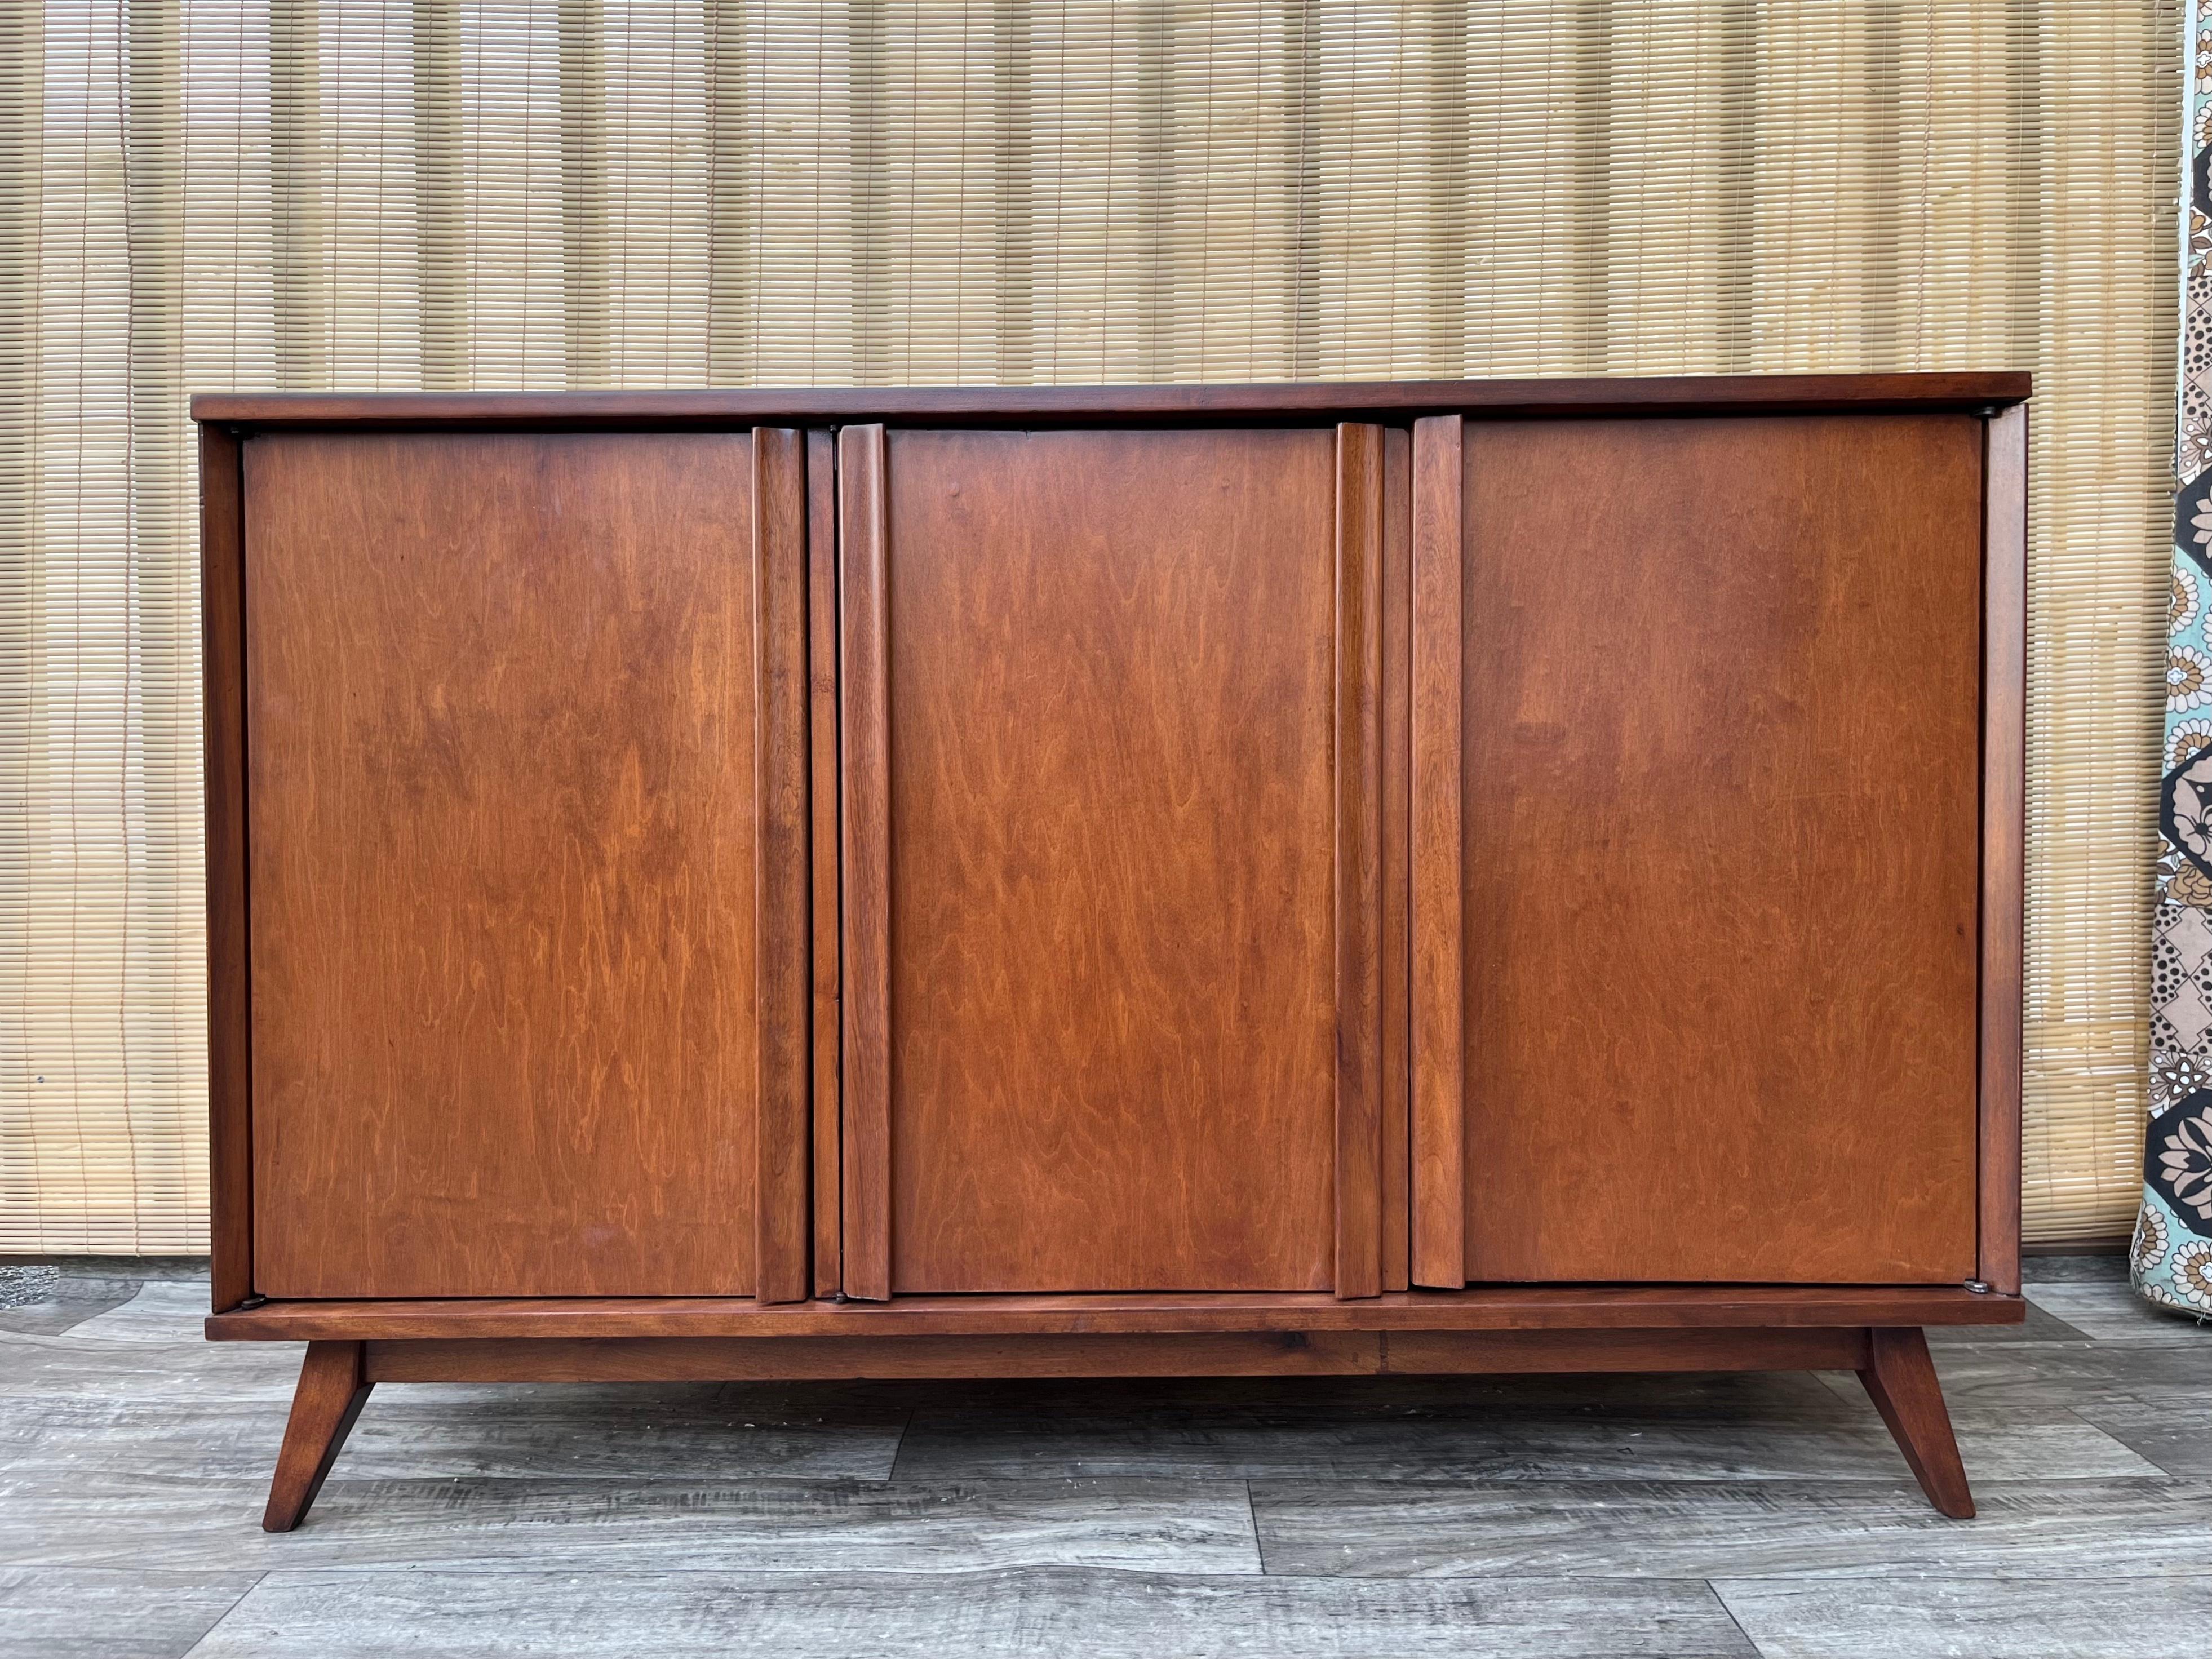 Fully Restored Mid Century Modern Sideboard Credenza. Circa 1960s.
Features a sleek Mid Century Modern design with tapered legs, a solid wood body, four hidden drawers, and a two doors cabinet with fixed shelves for extra storage space. 
Recently